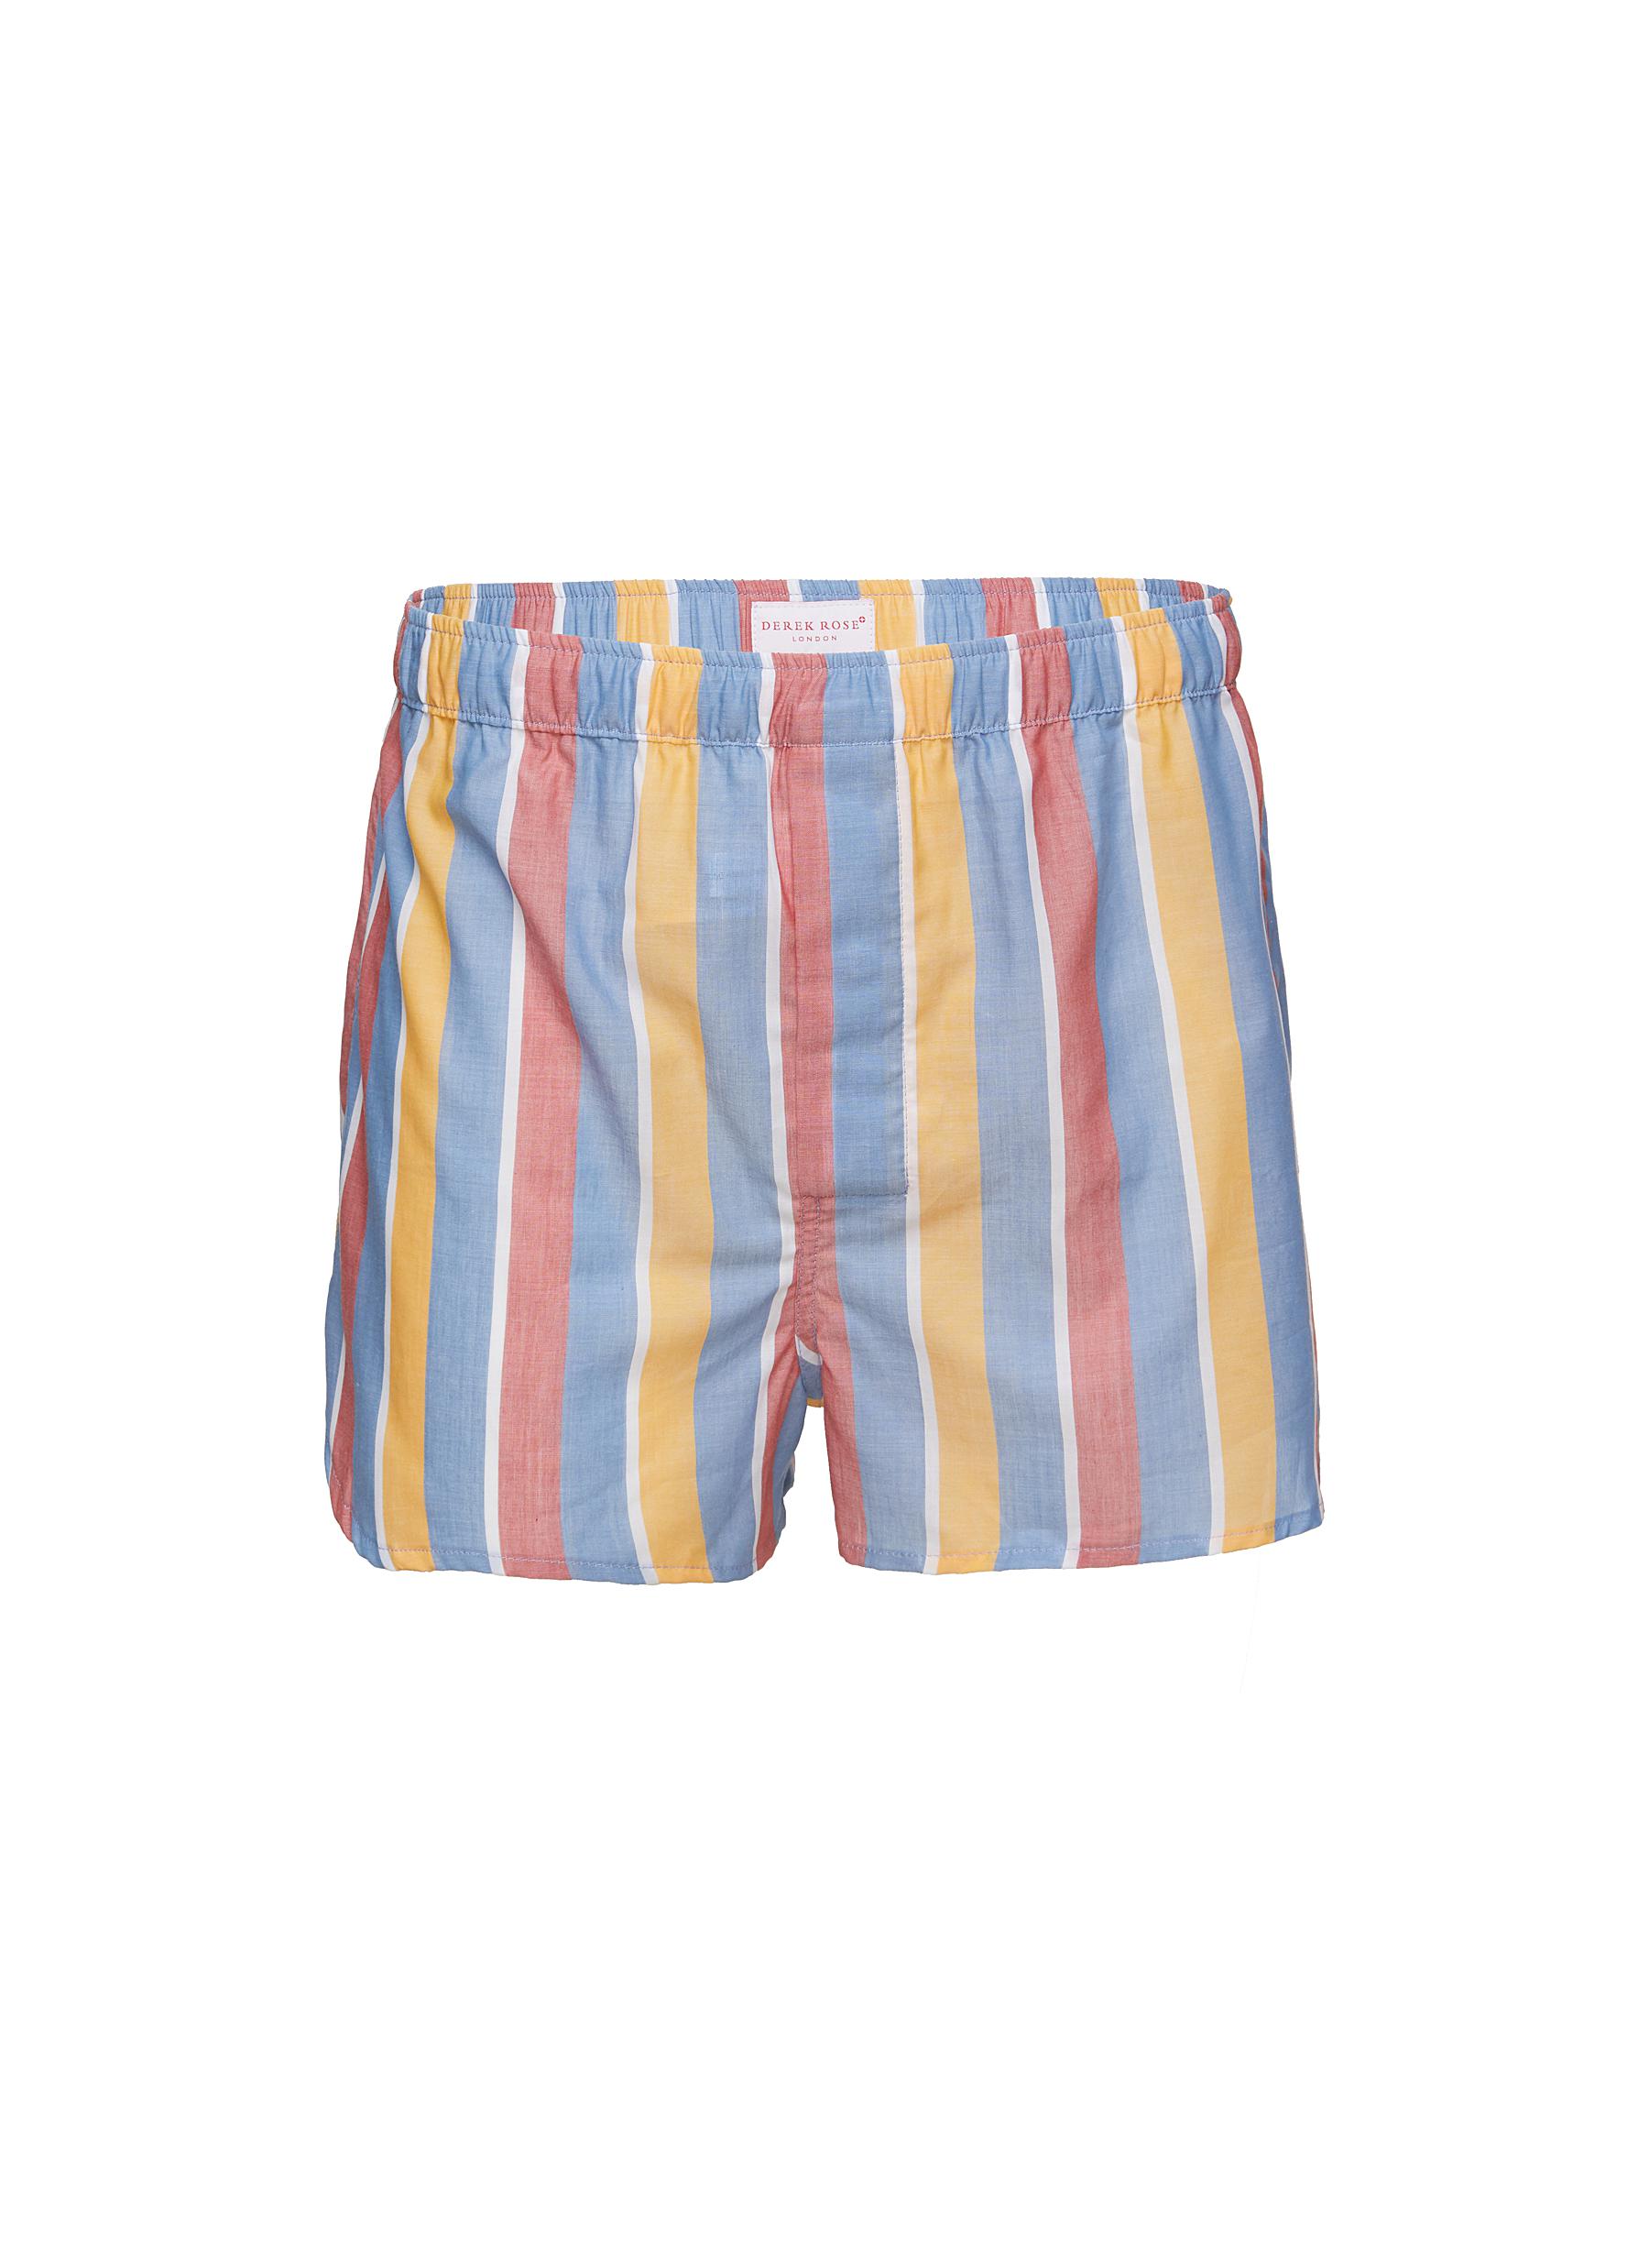 Striped Magnetic Fly Cotton Boxers